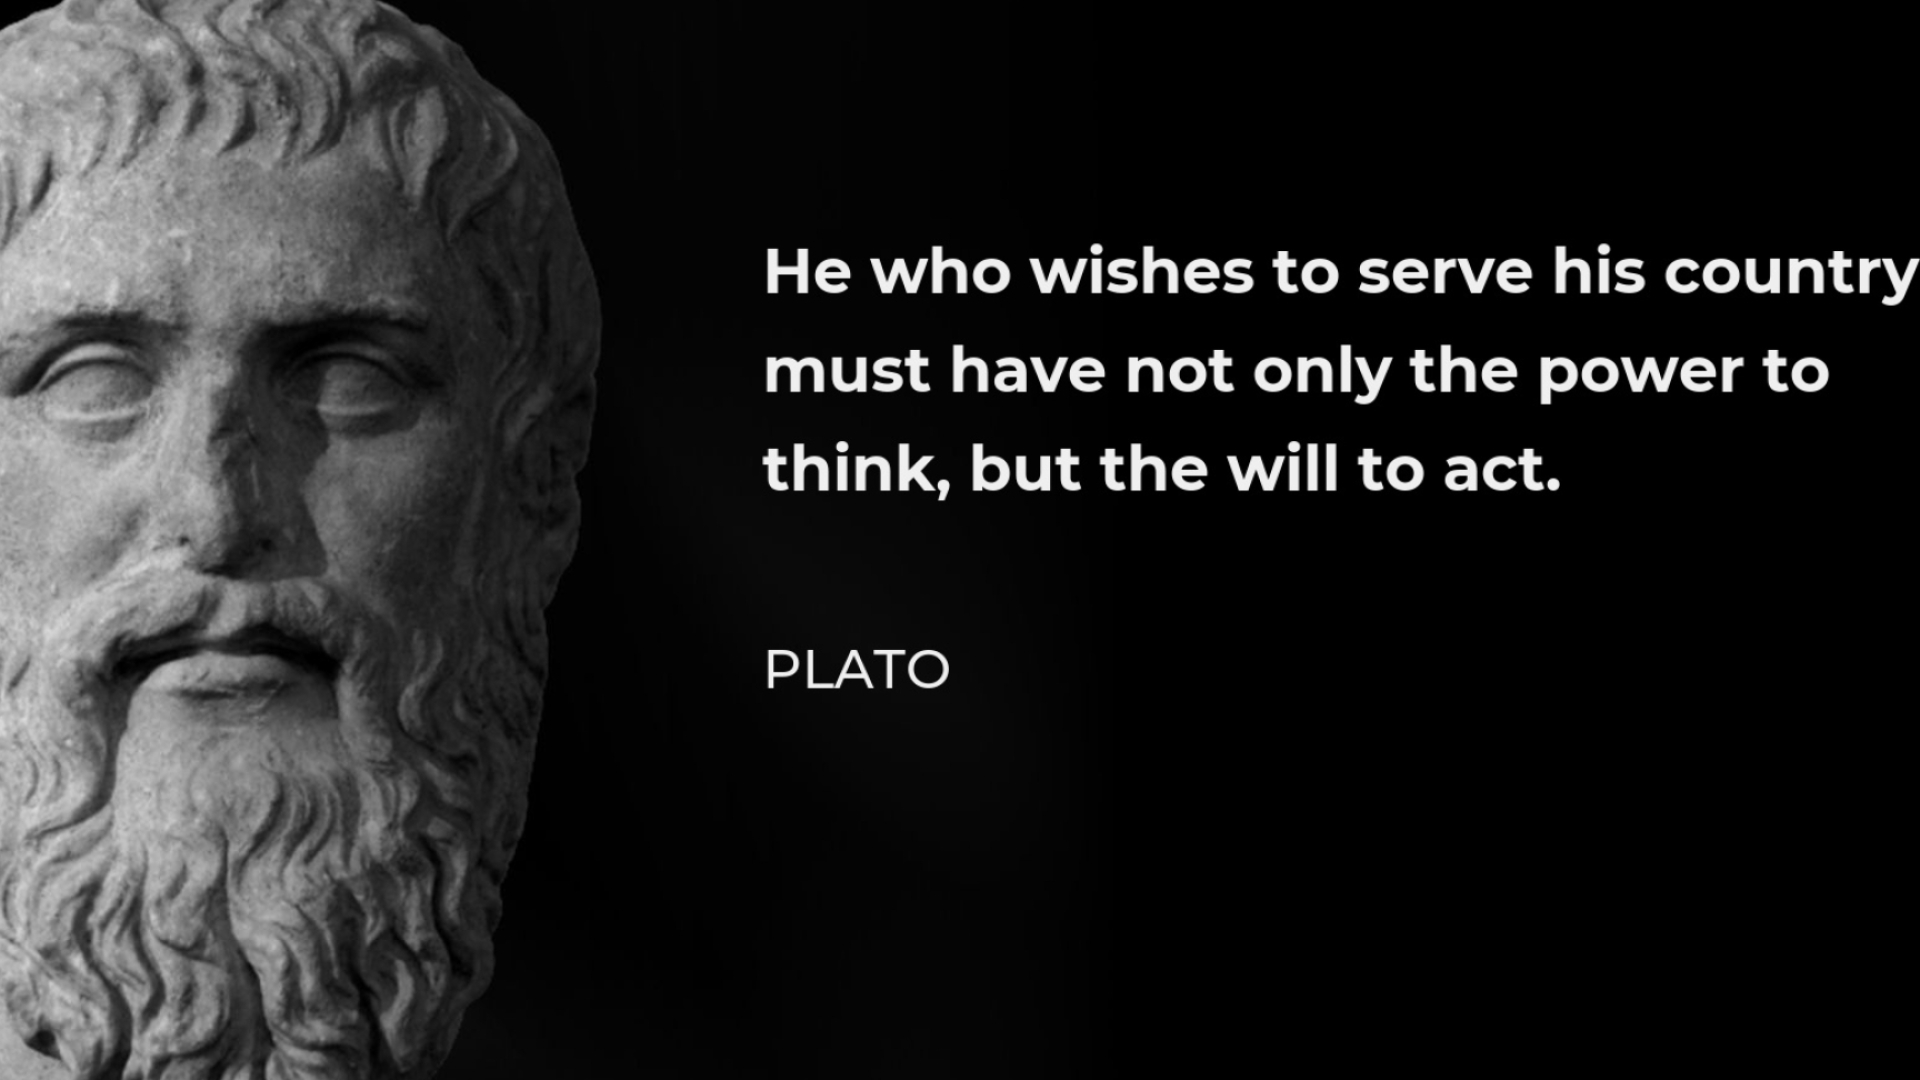 Plato, Quote, Serve his country, Act, 1920x1080 Full HD Desktop